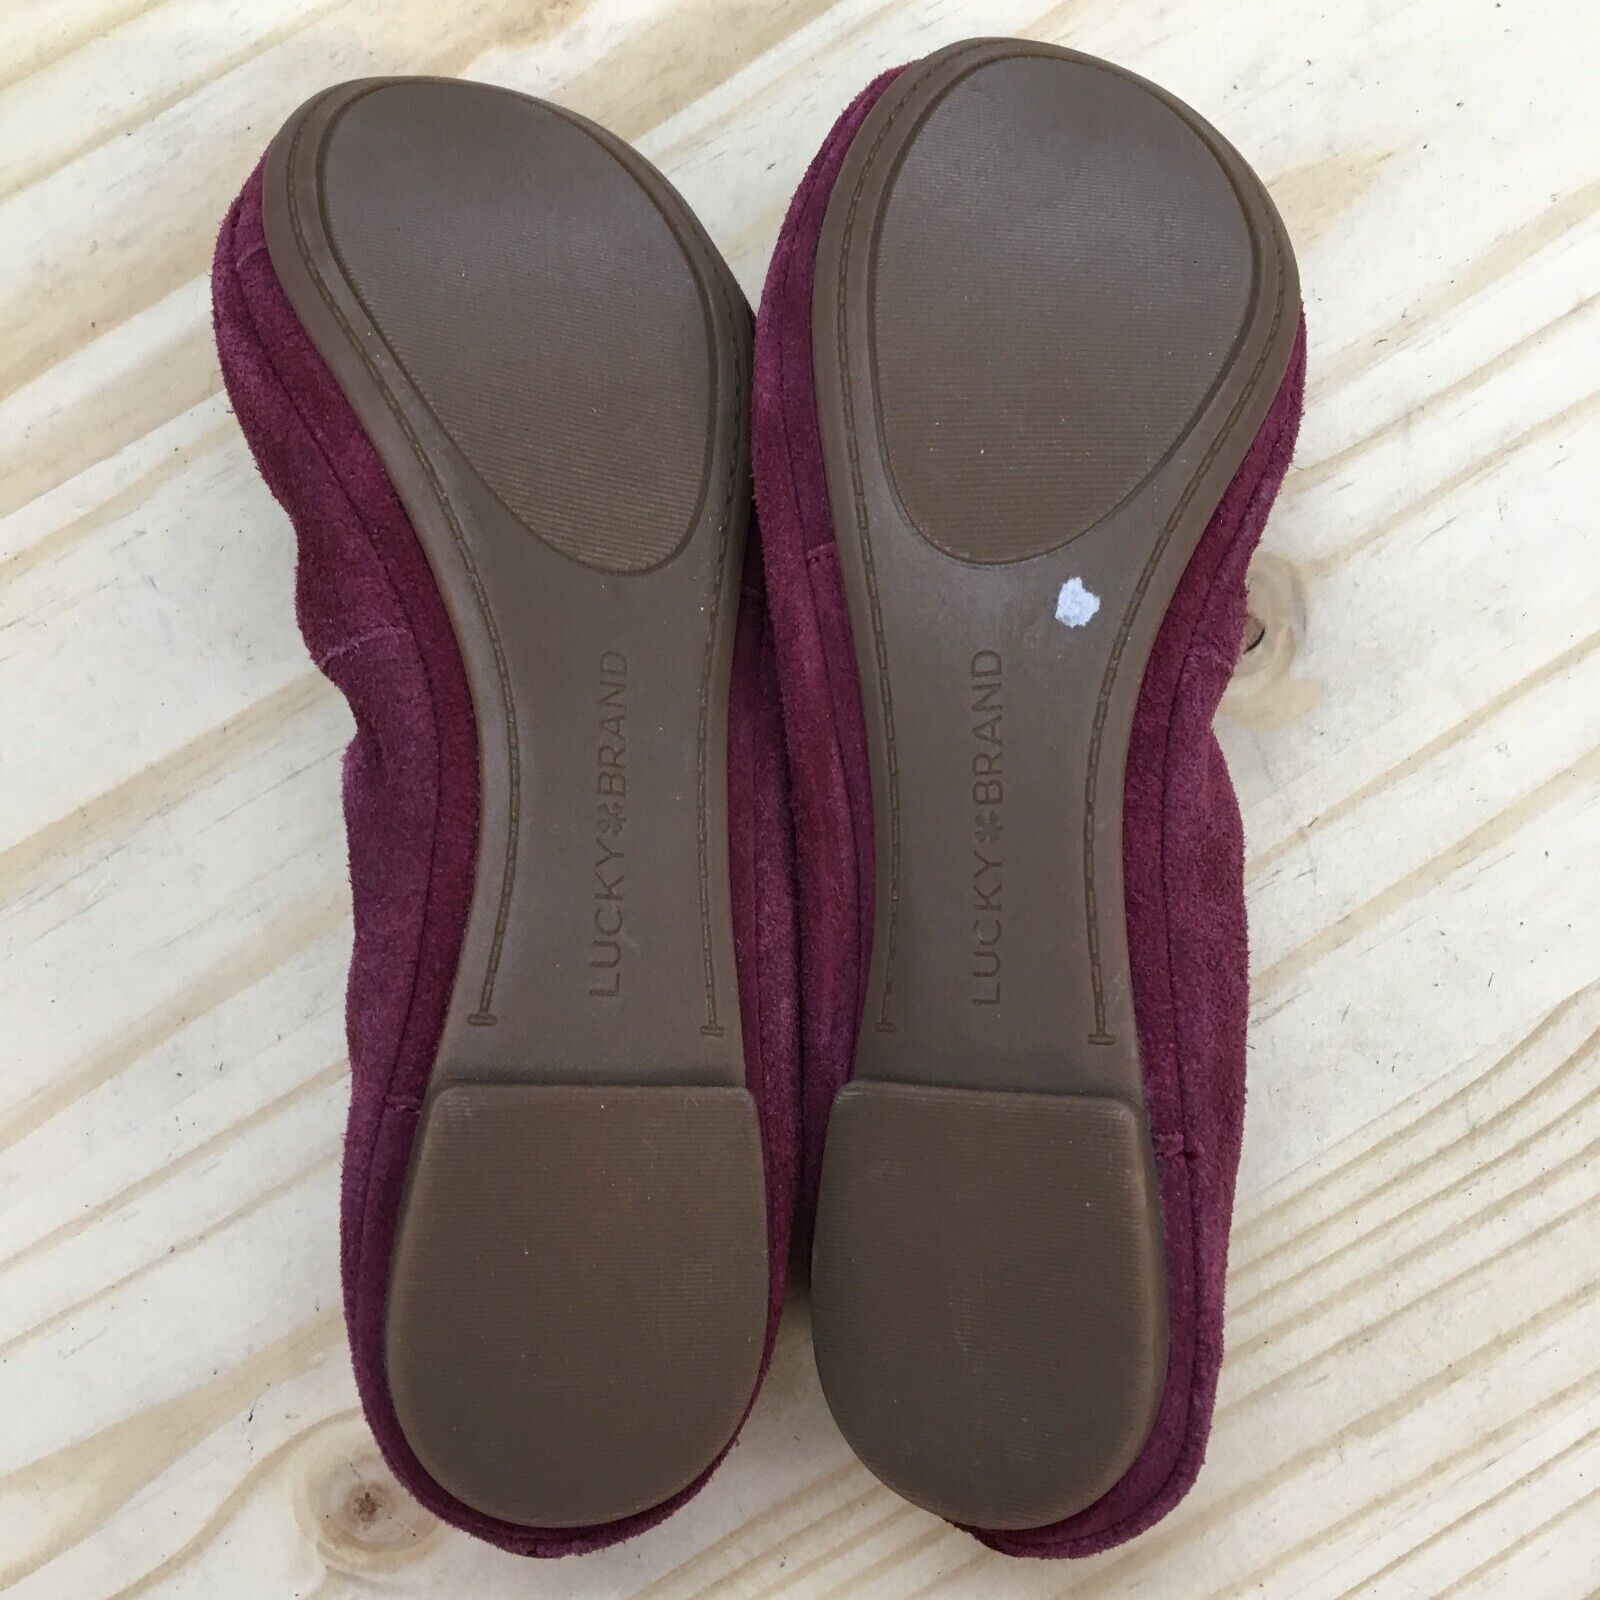 Lucky Brand Shoes Womens 7 M Erin Ballet Flats Burgundy Leather Slip On NEW